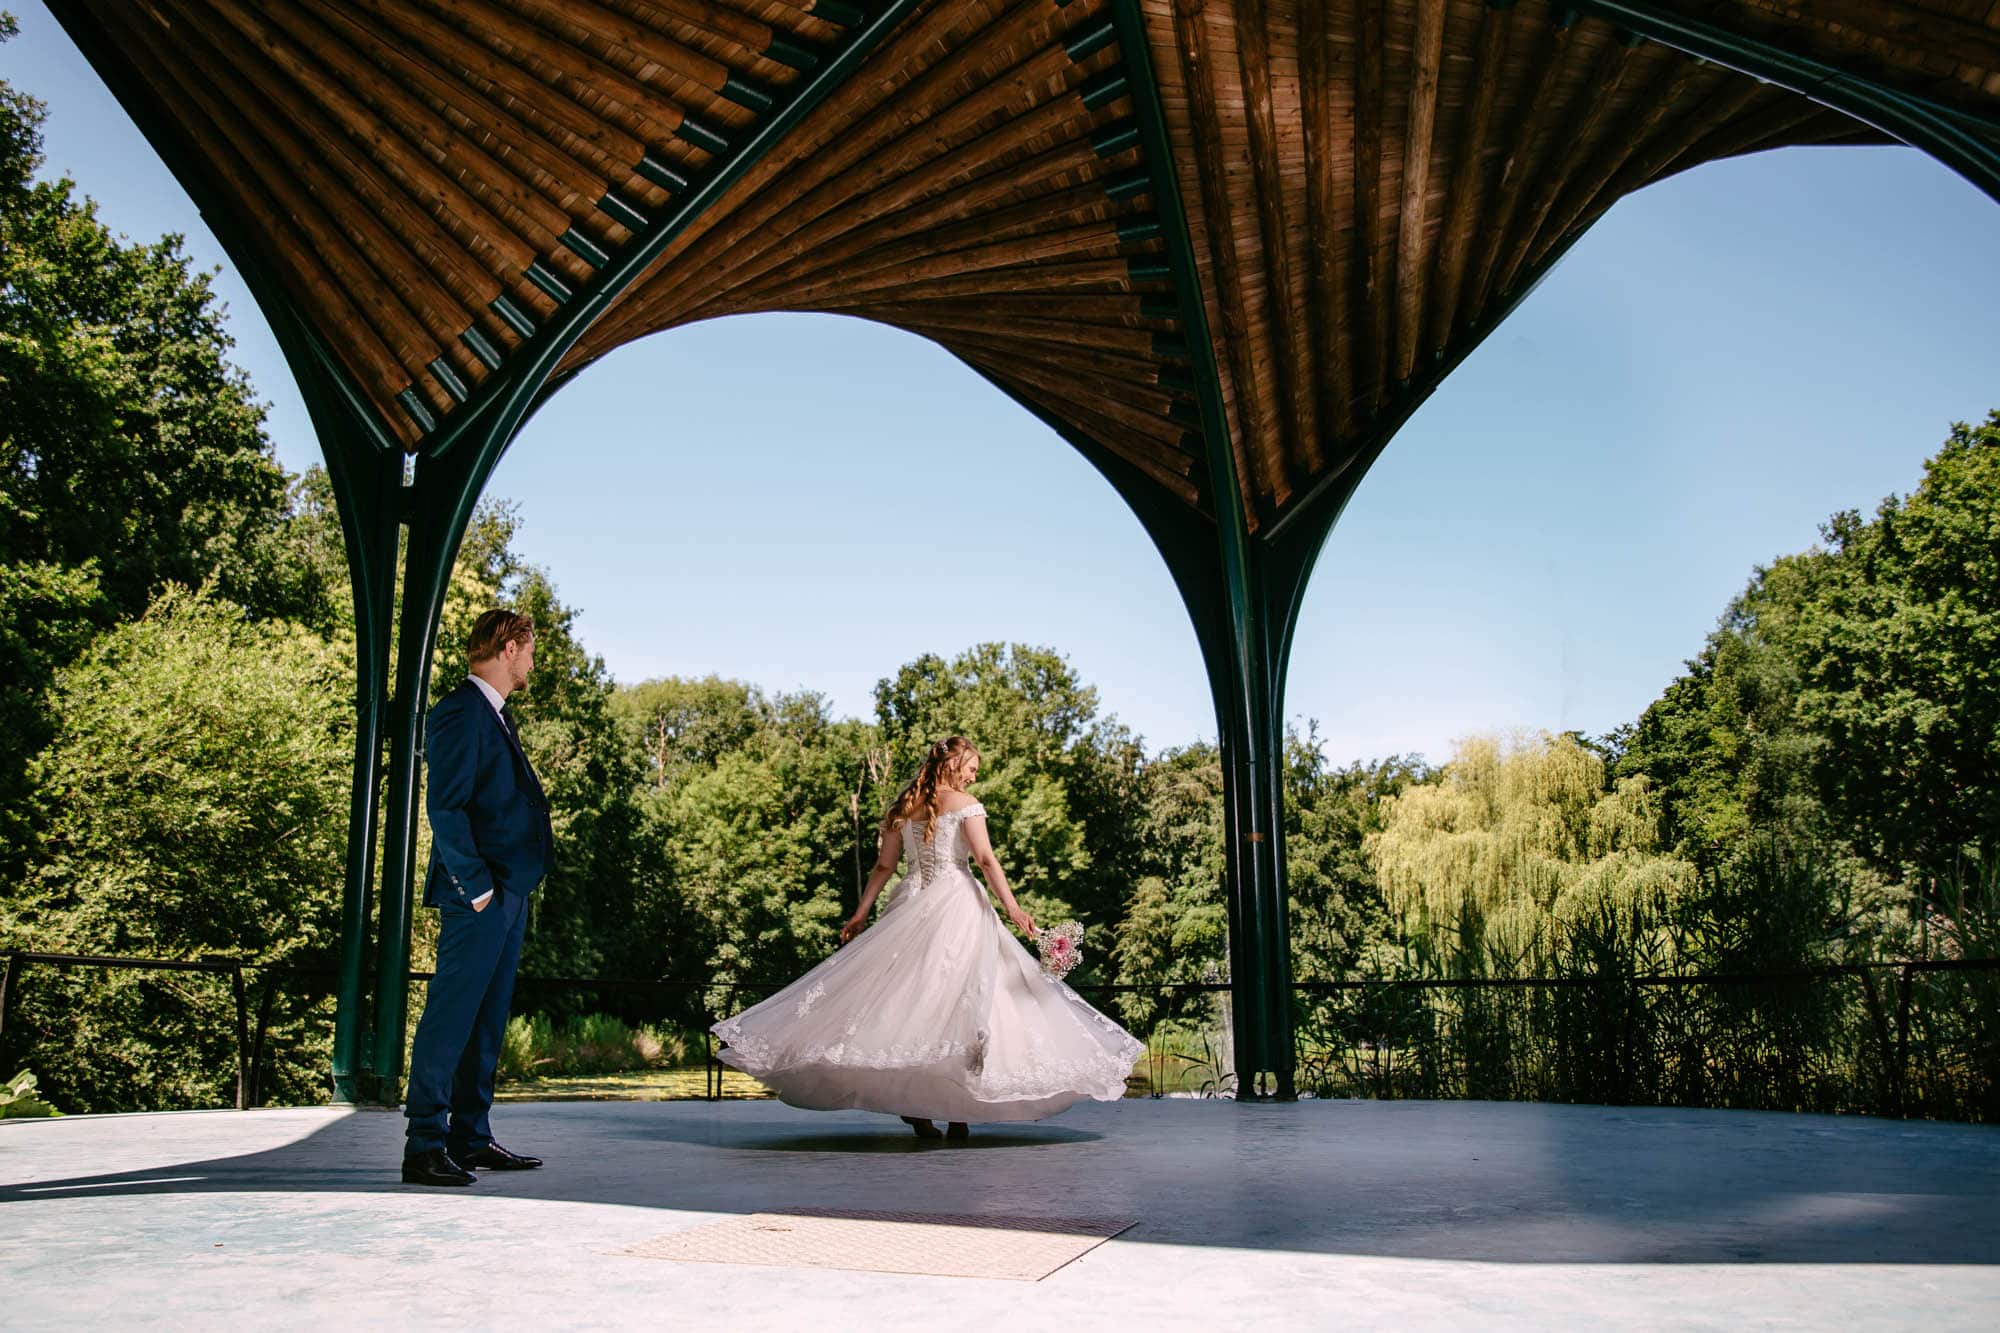 A bride and groom stand under a gazebo, the bride wearing a beautiful A-line wedding dress.